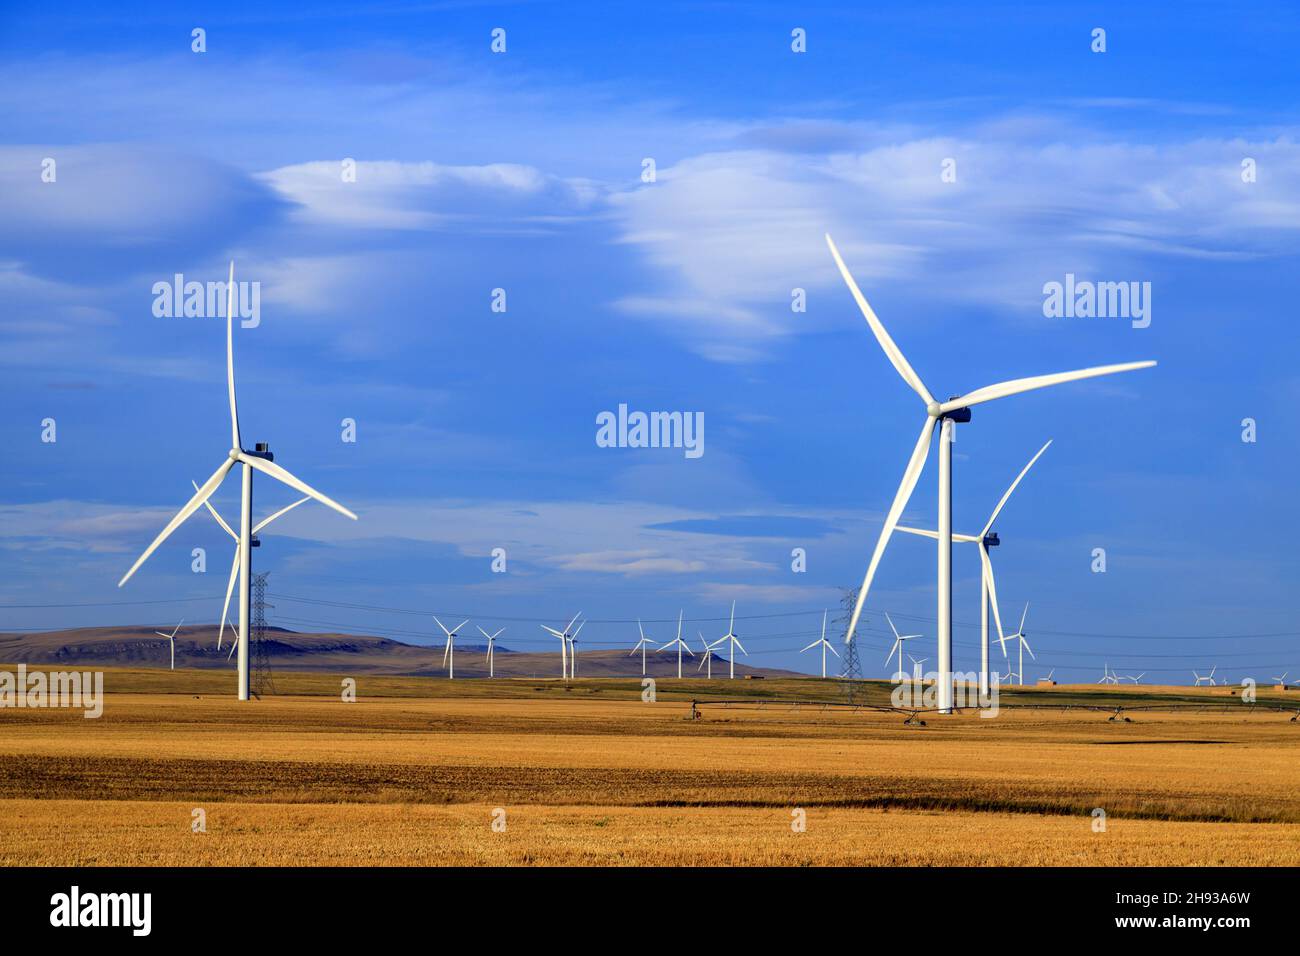 Wind power or wind energy is the use of wind turbines to generate electricity. Wind power is a popular, sustainable, renewable energy source. Stock Photo